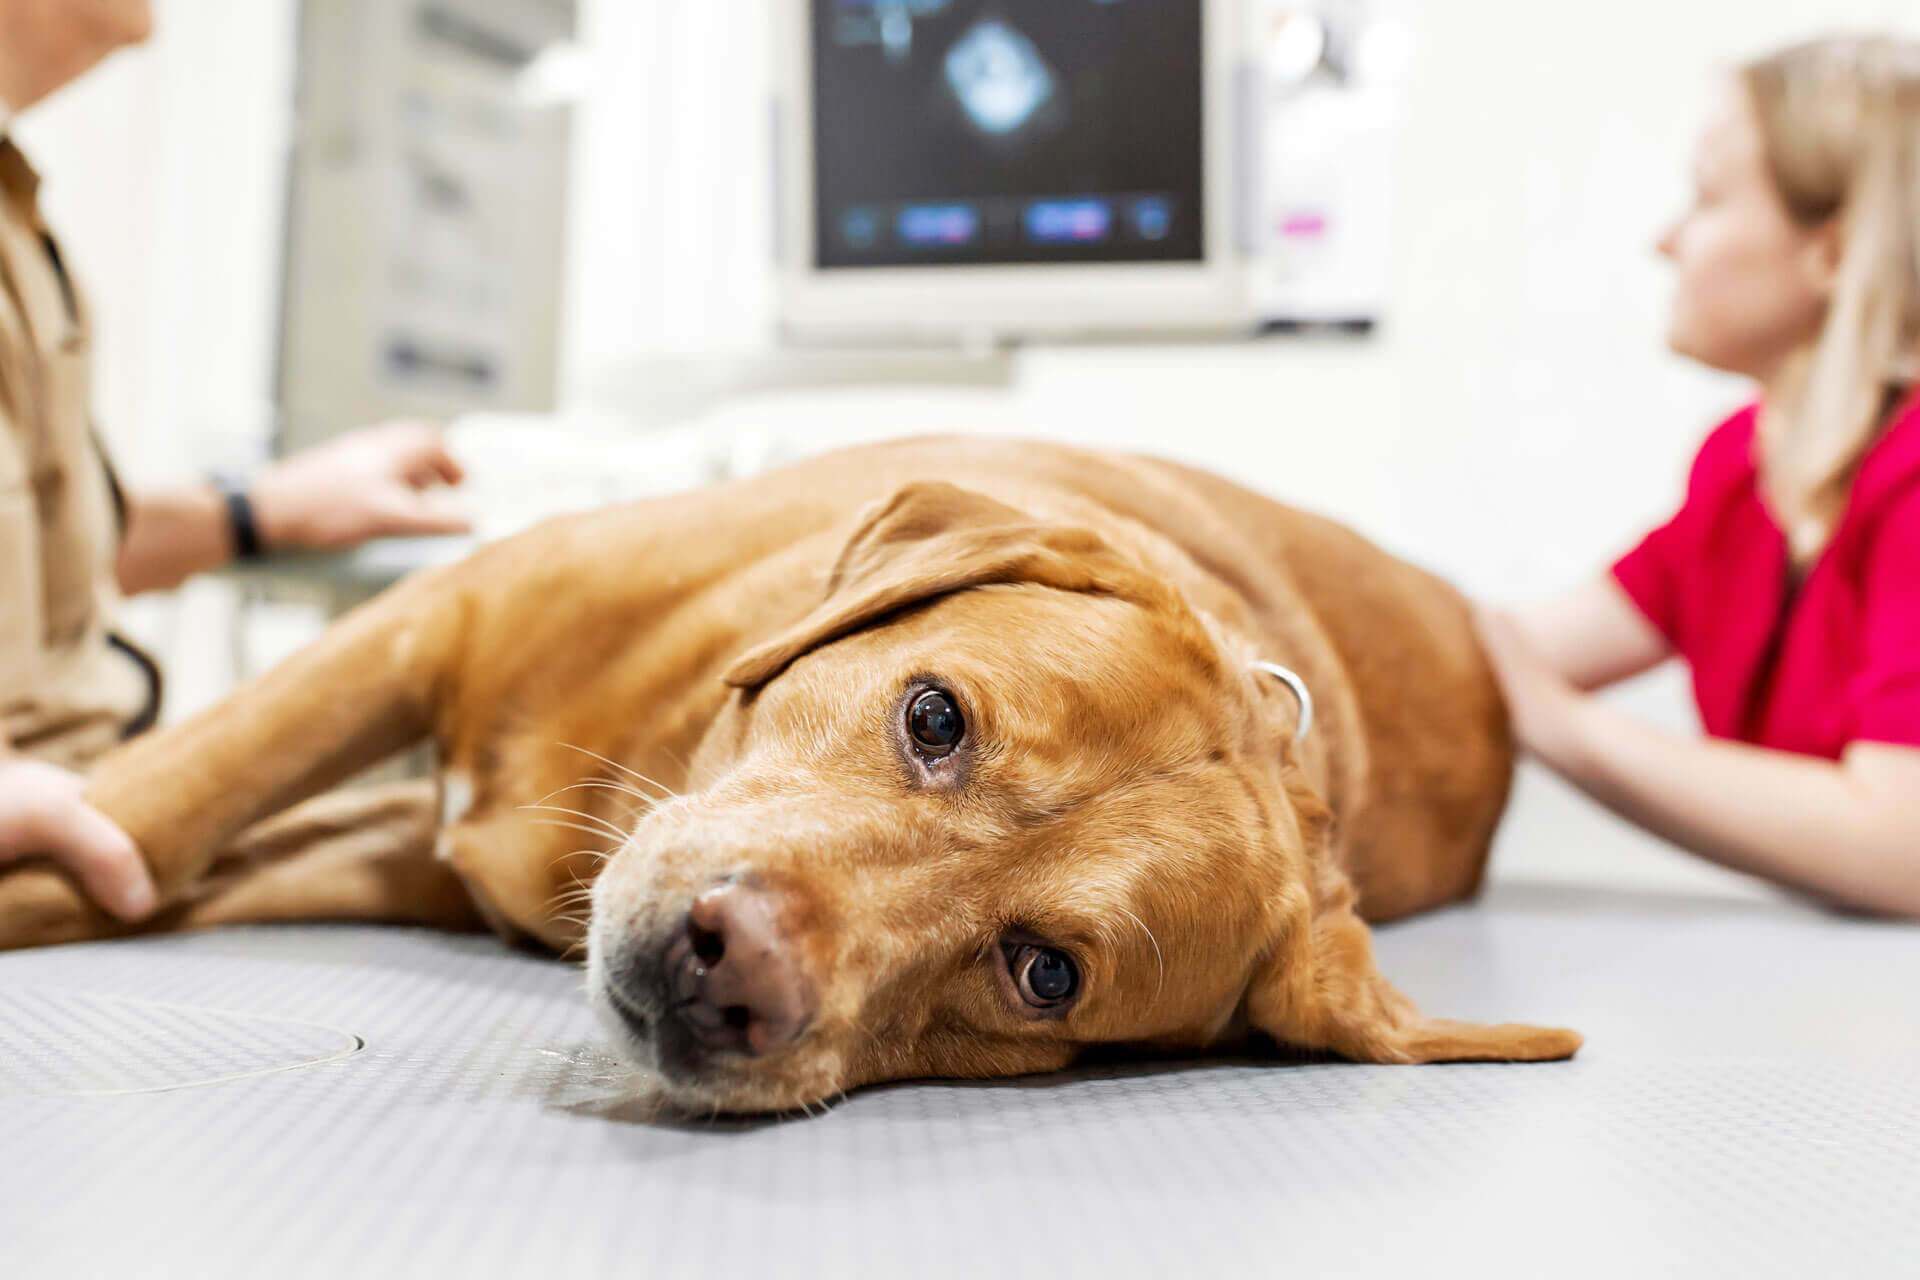 Skin Cancer In Dogs: Warning Signs, Prevention & Treatment